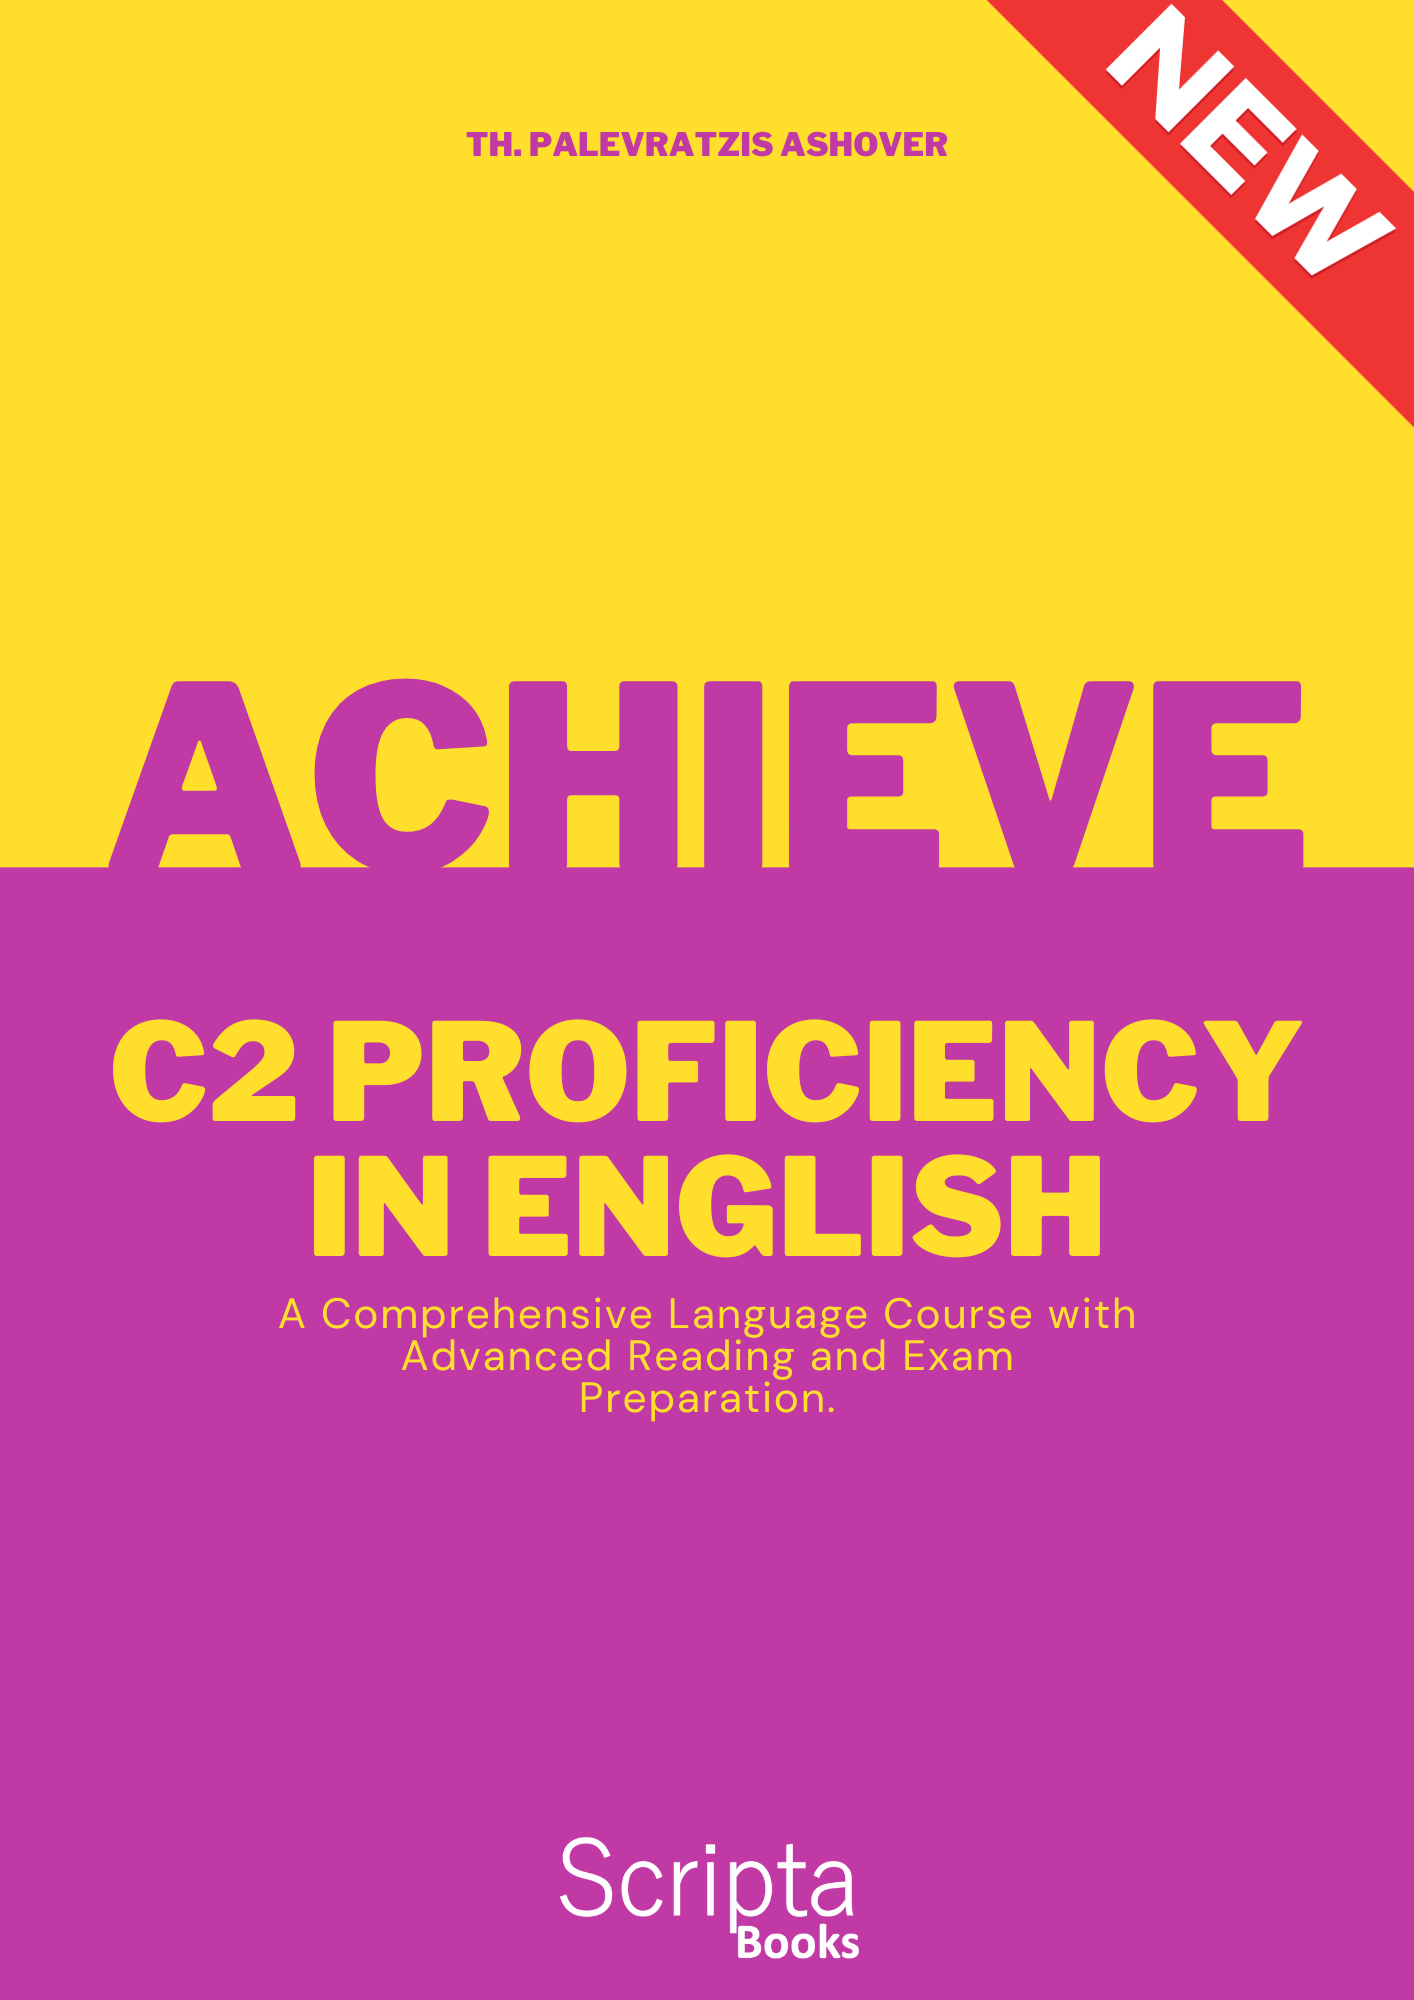 Coursebook for C2 in English - Achieve C2 Proficiency in English